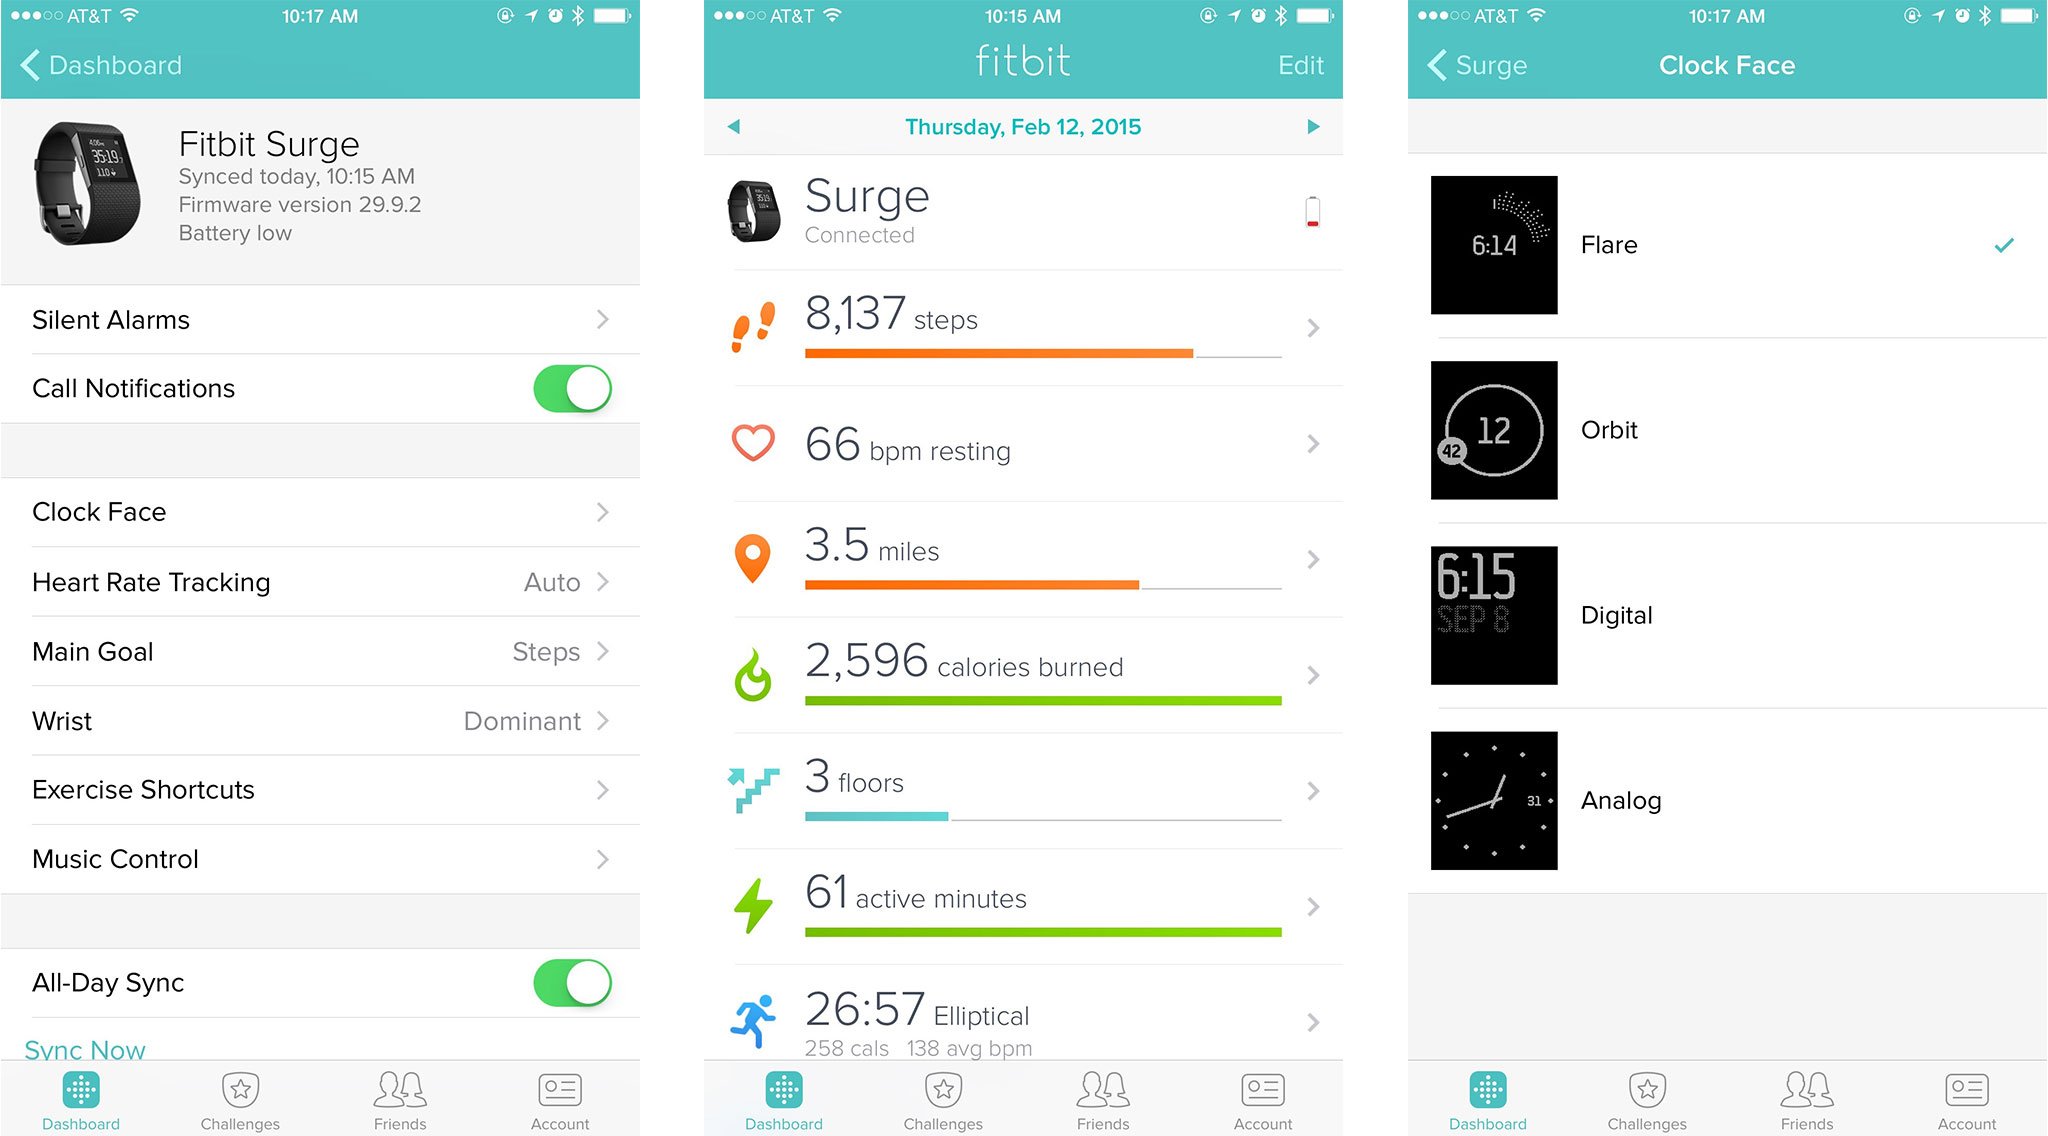 Fitbit Surge fitness tracker review | iMore